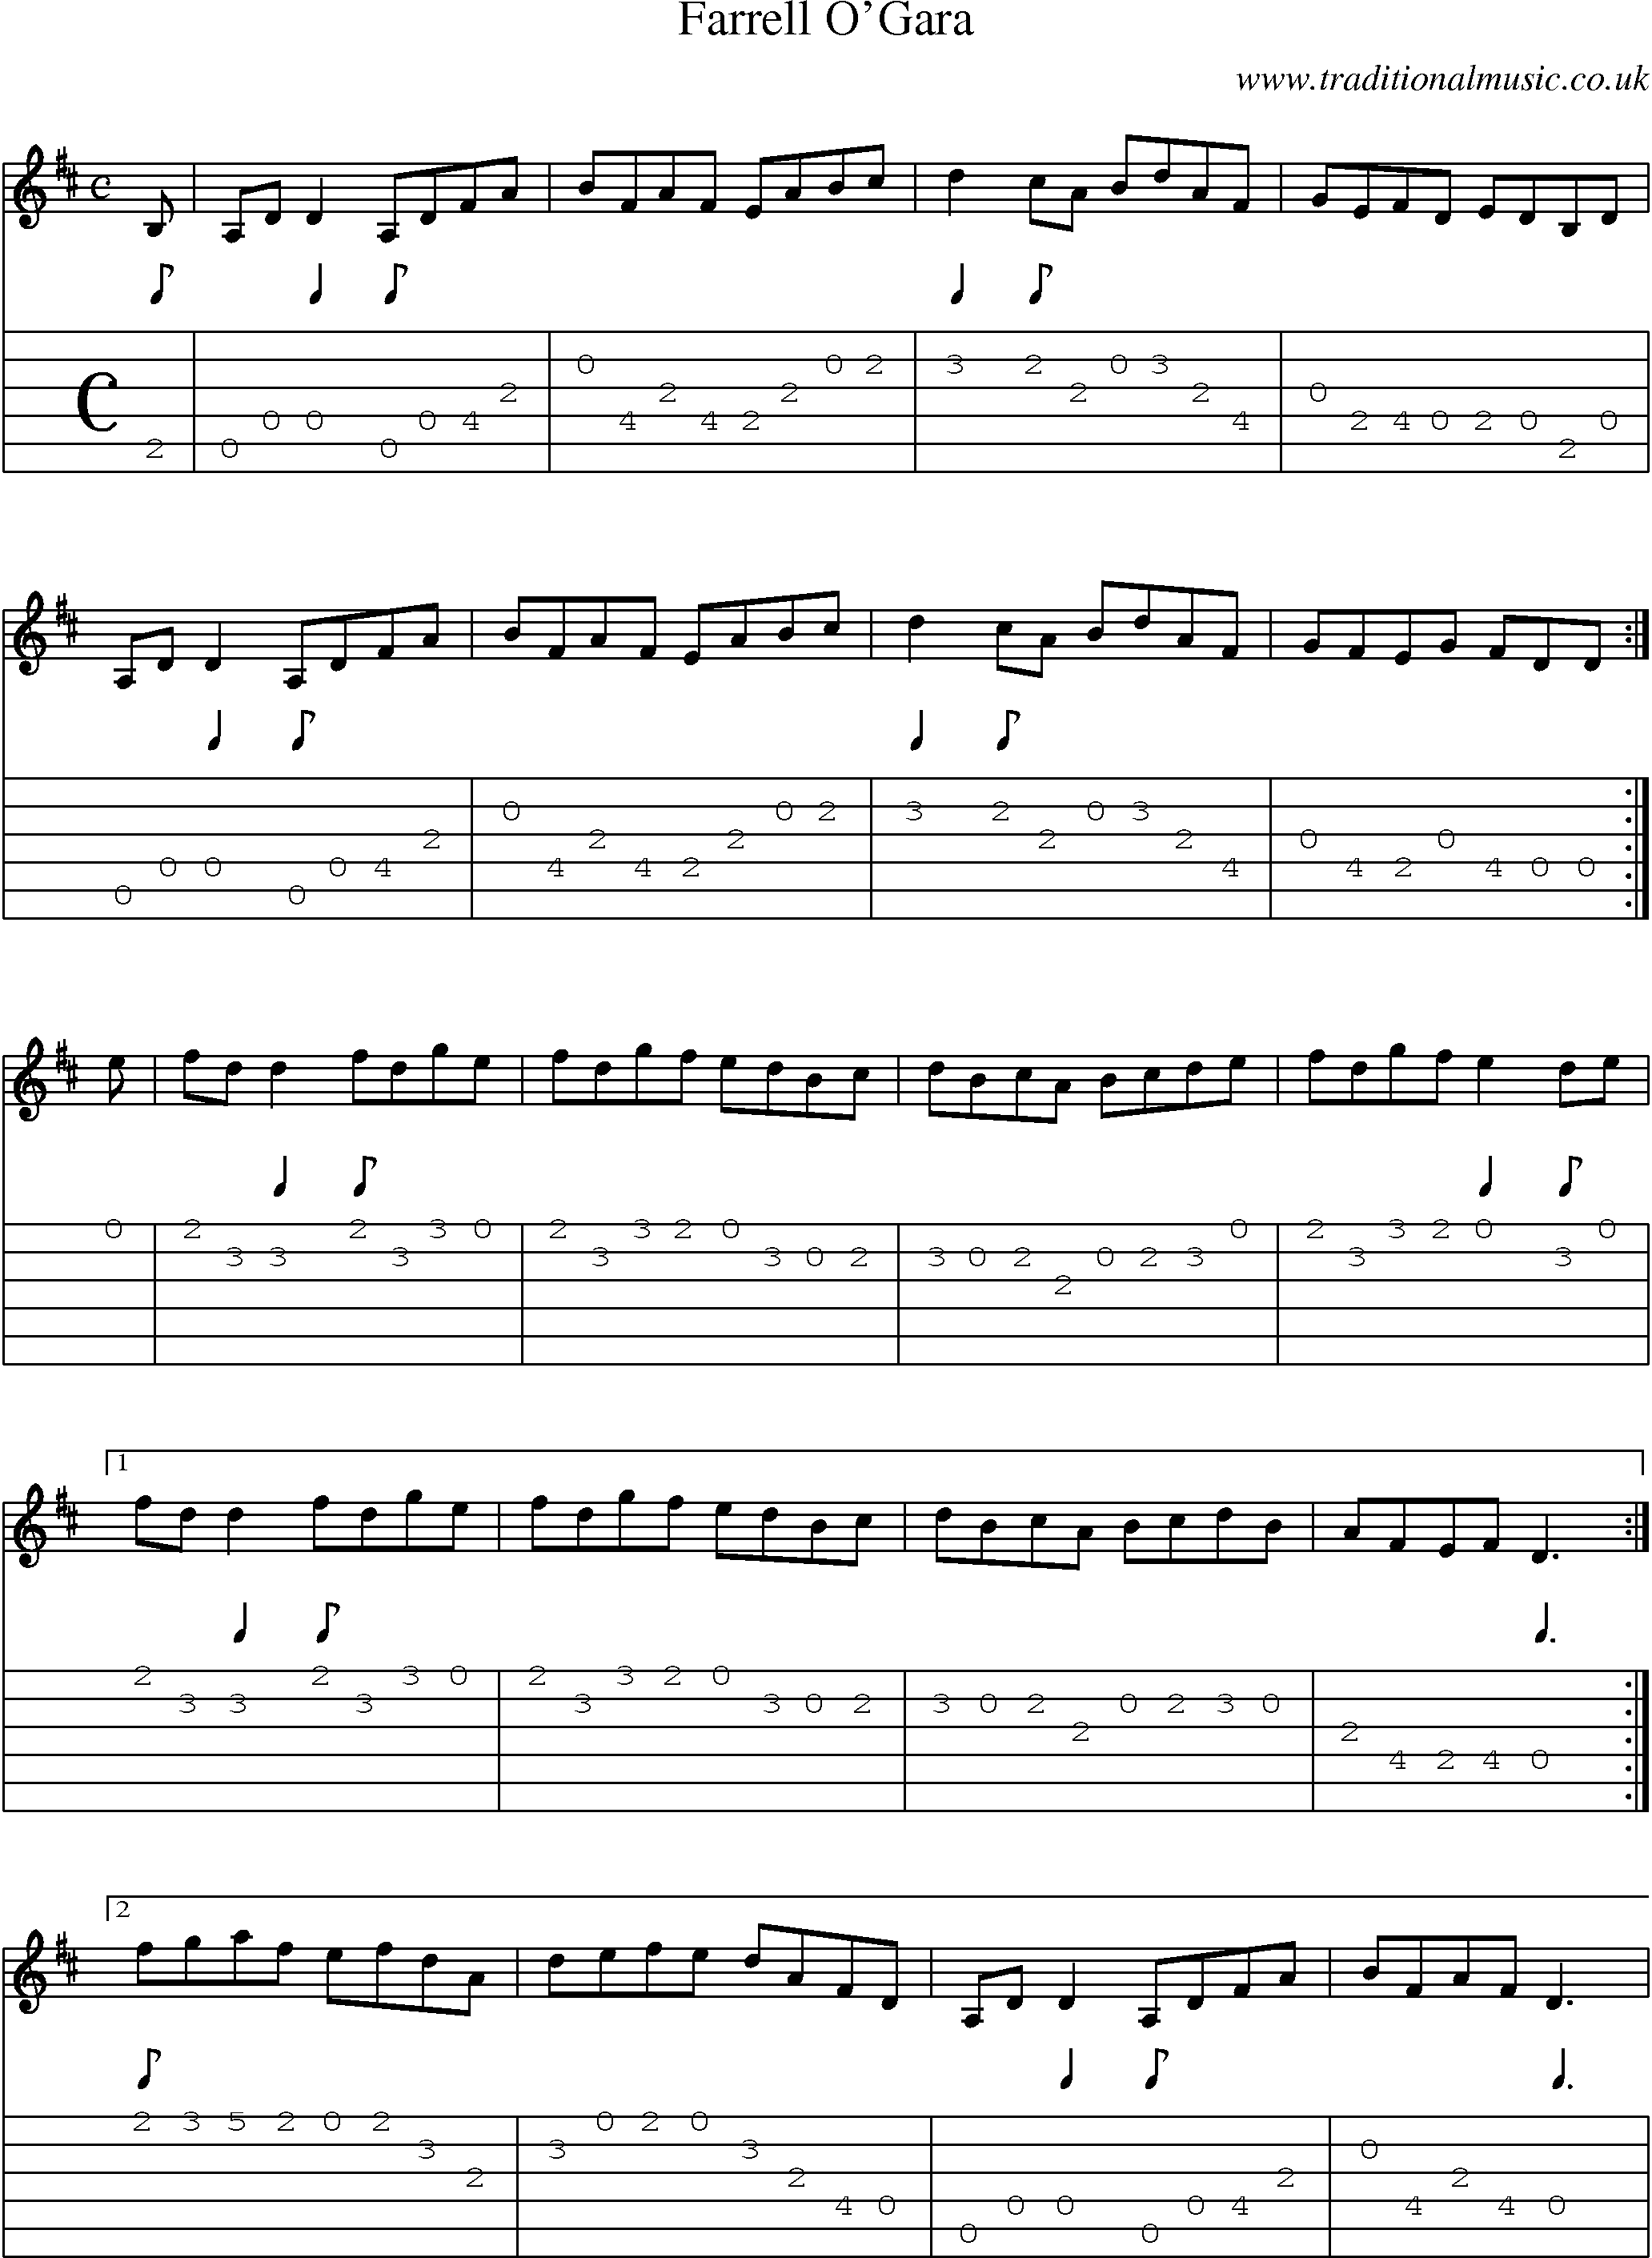 Music Score and Guitar Tabs for Farrell Ogara